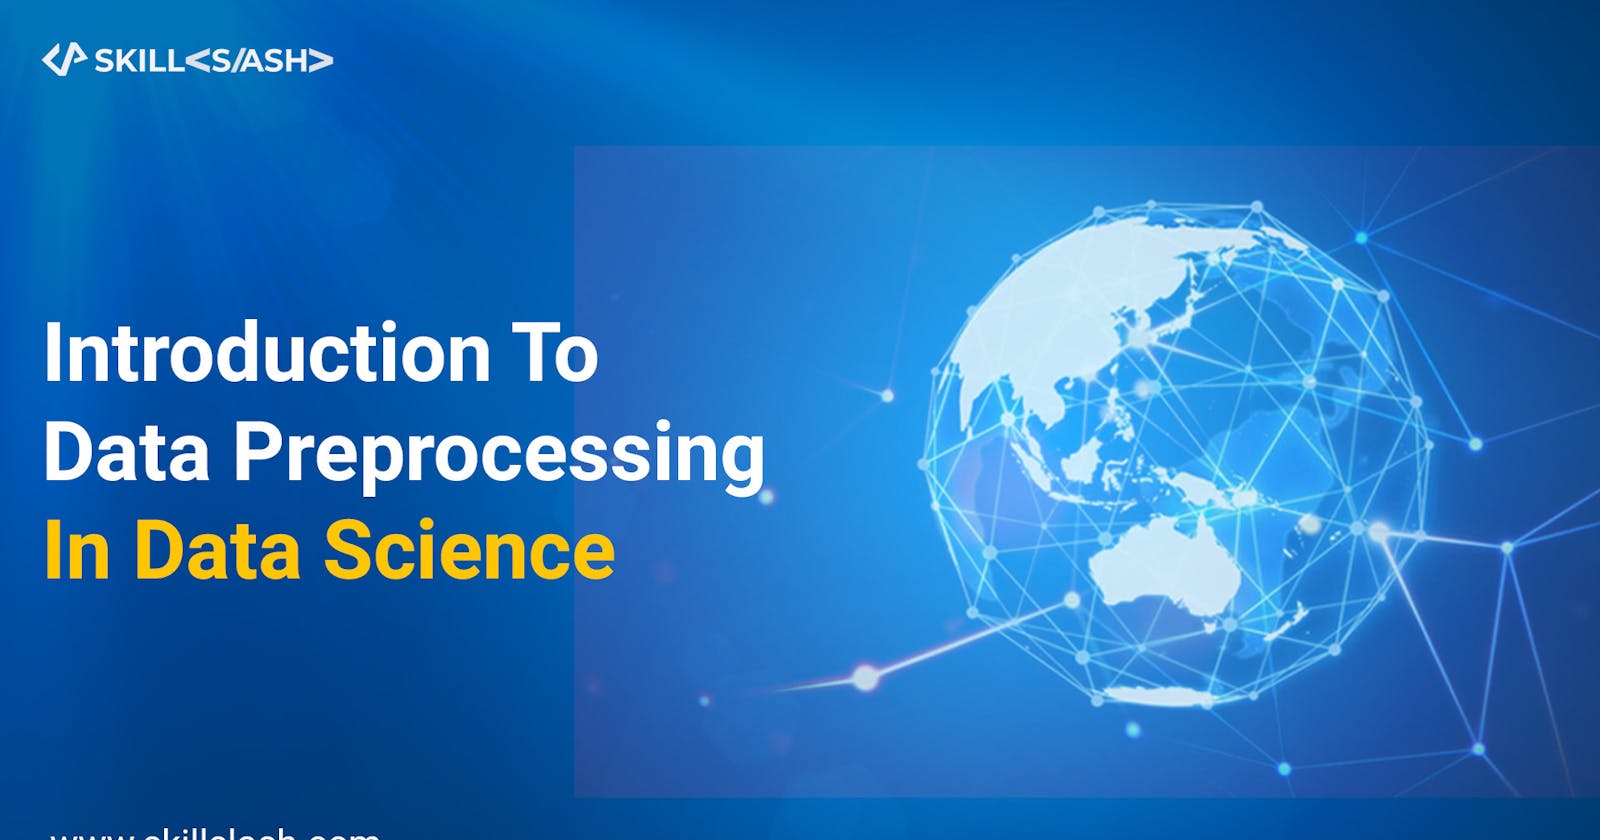 Introduction To Data Preprocessing In Data Science